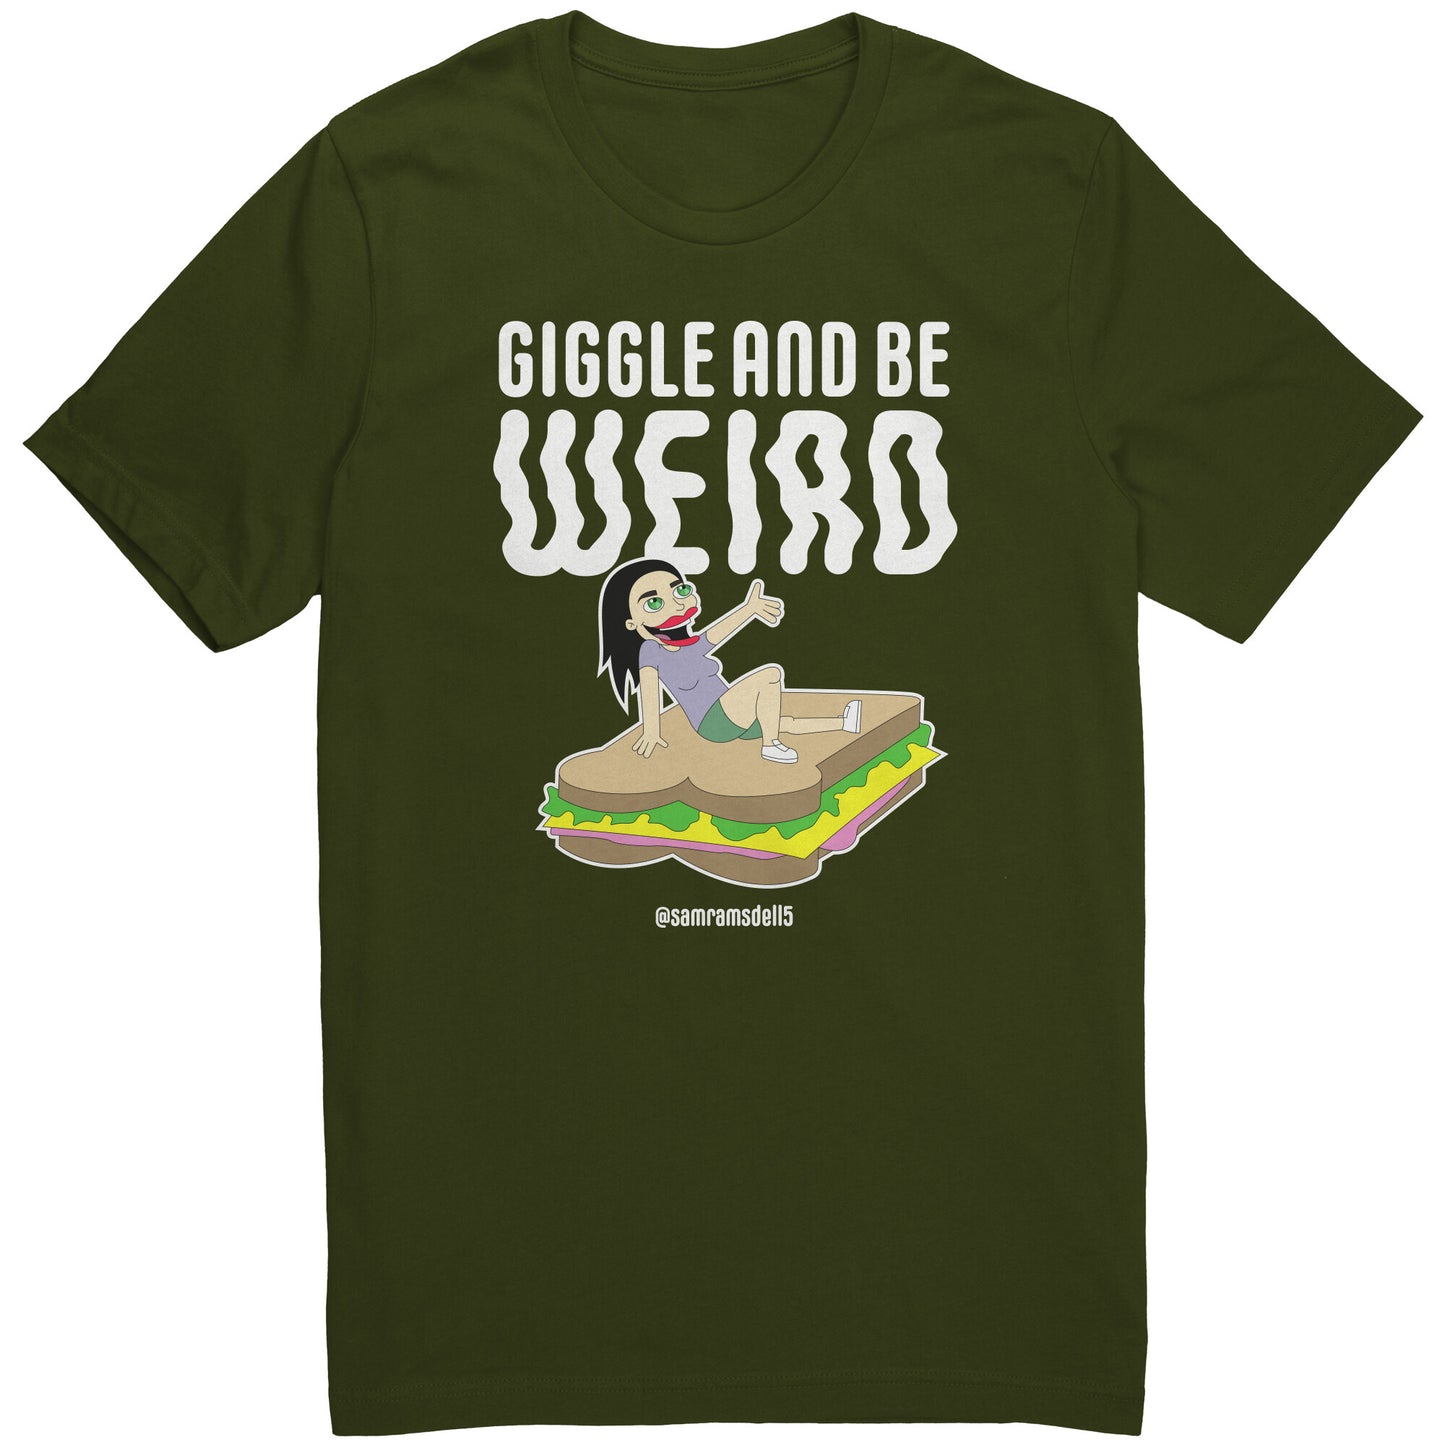 Giggle and be Weird - T Shirt